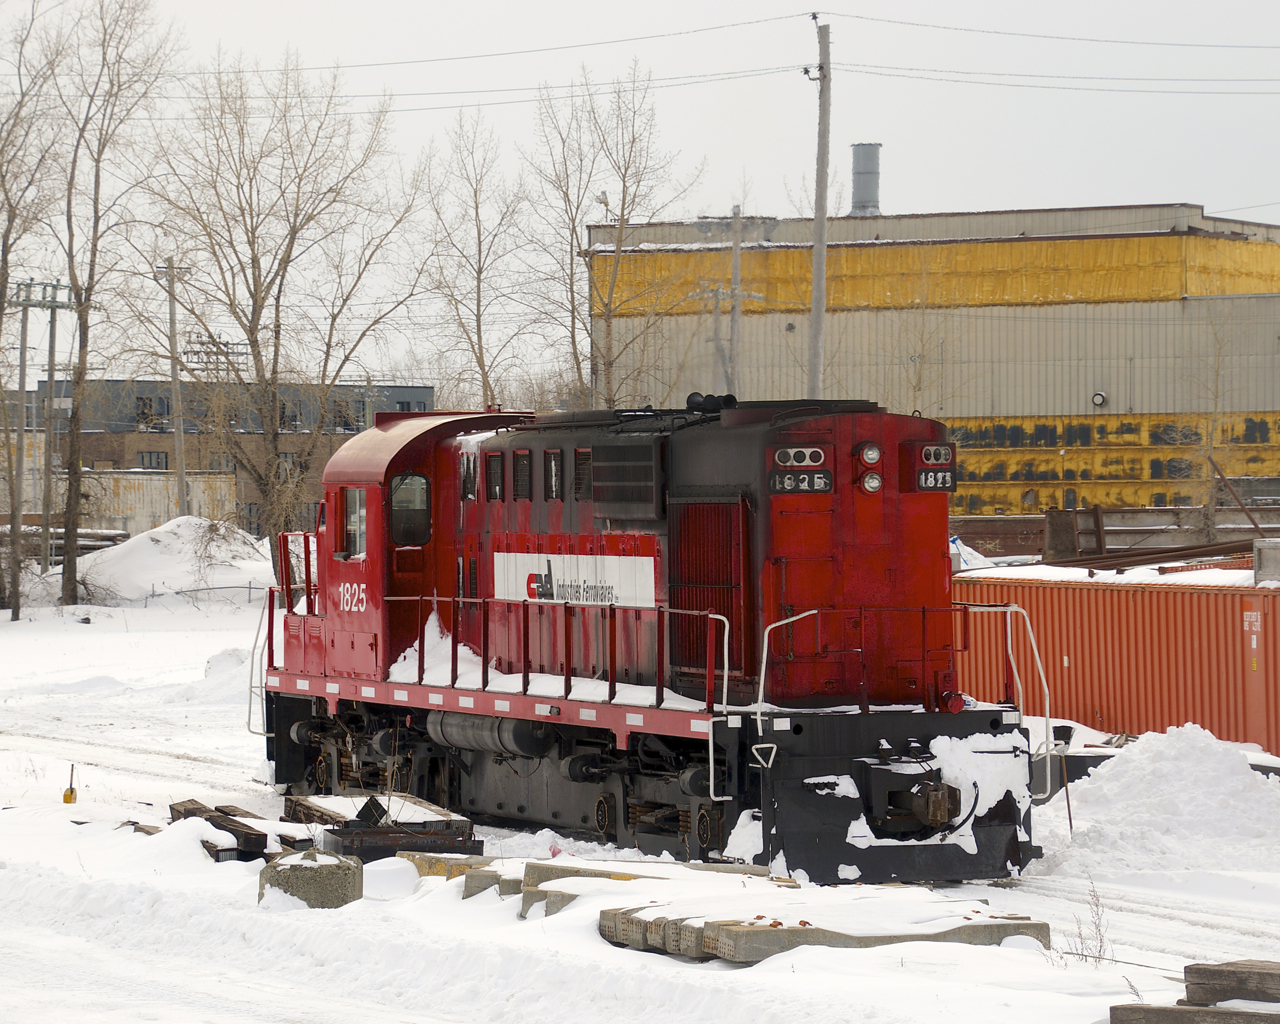 Built by MLW in their East End Montreal plant as CP 8772 in 1958, CAD 1825 (rebuilt by CP to CP 1825) still see service in its hometown as one of the switchers at Cad Railway Industries.